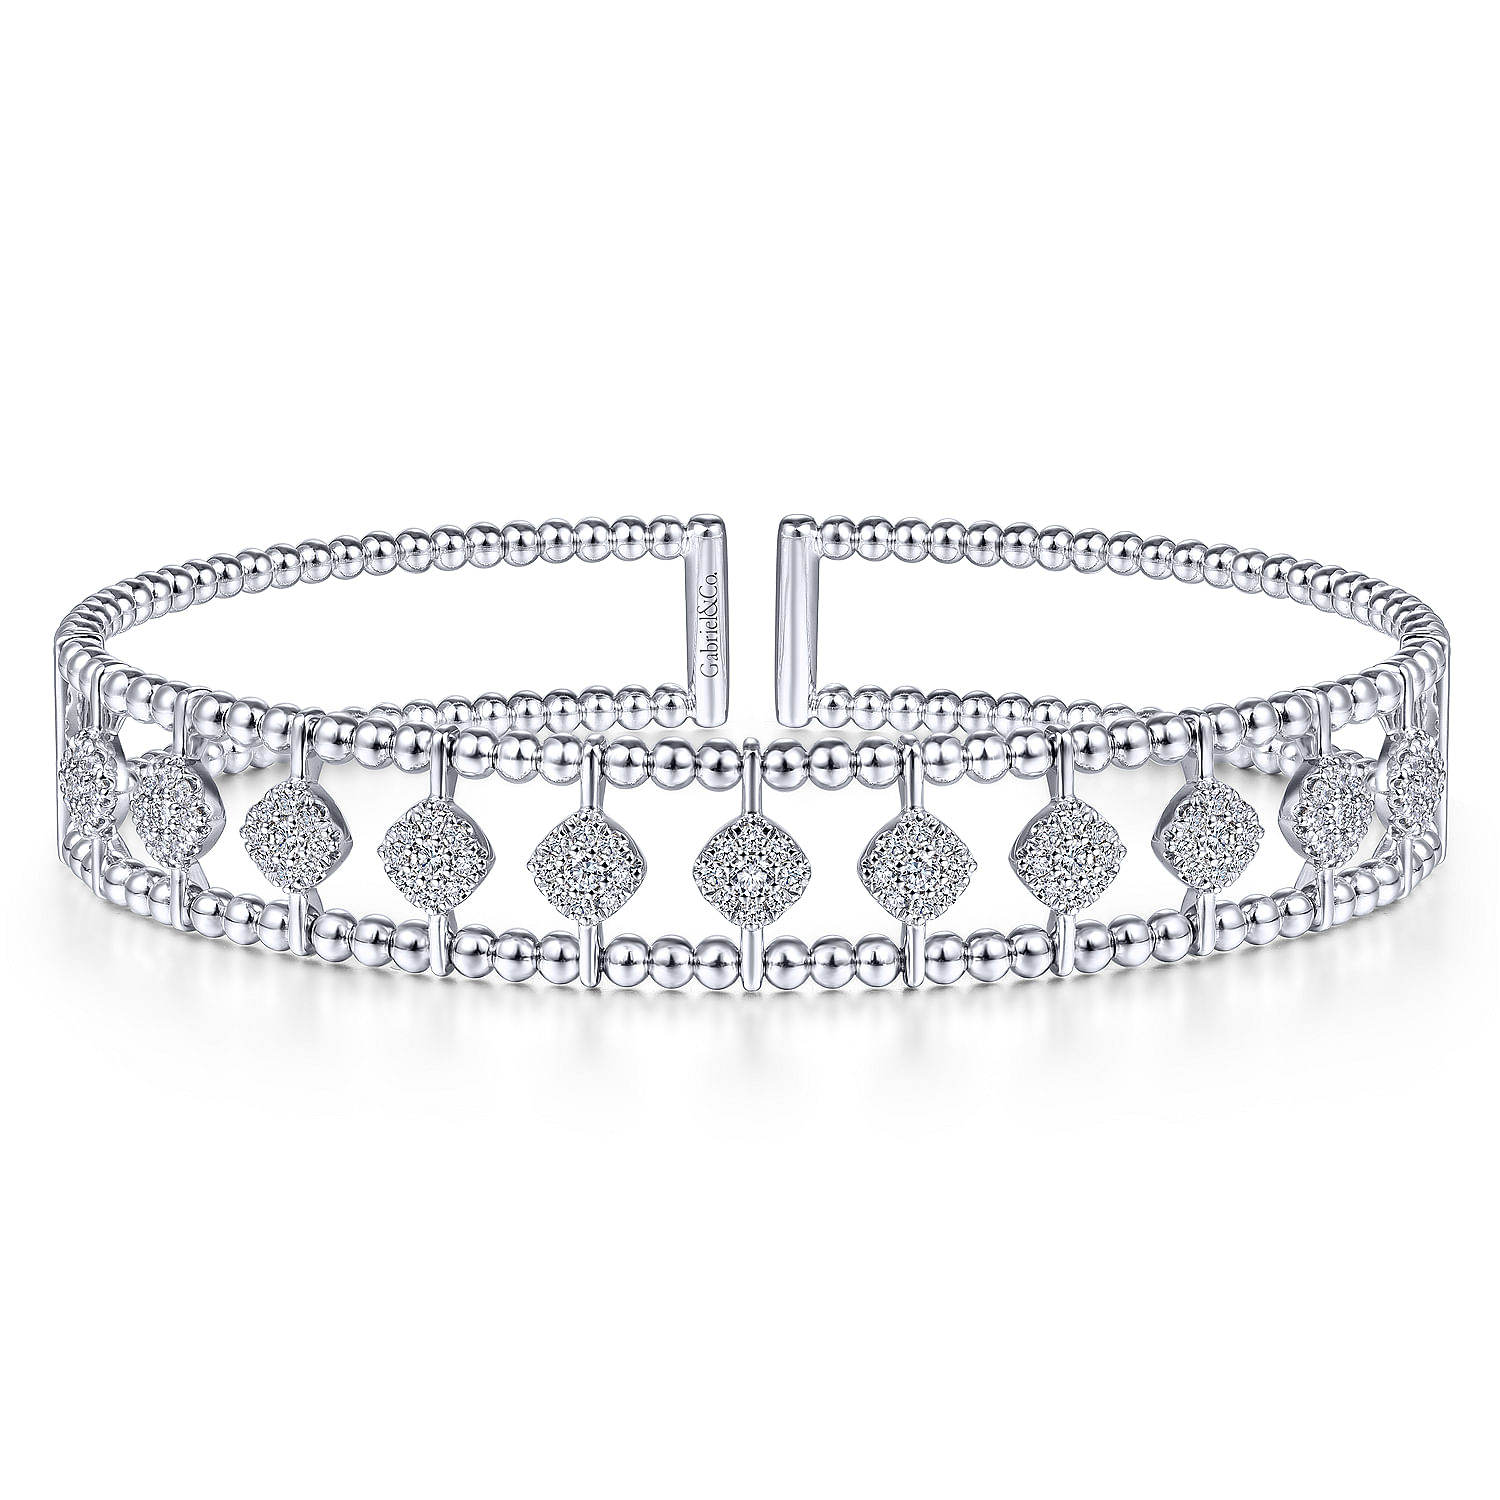 14K White Gold Bujukan Bead Cuff Bracelet with Pave Diamond Connectors